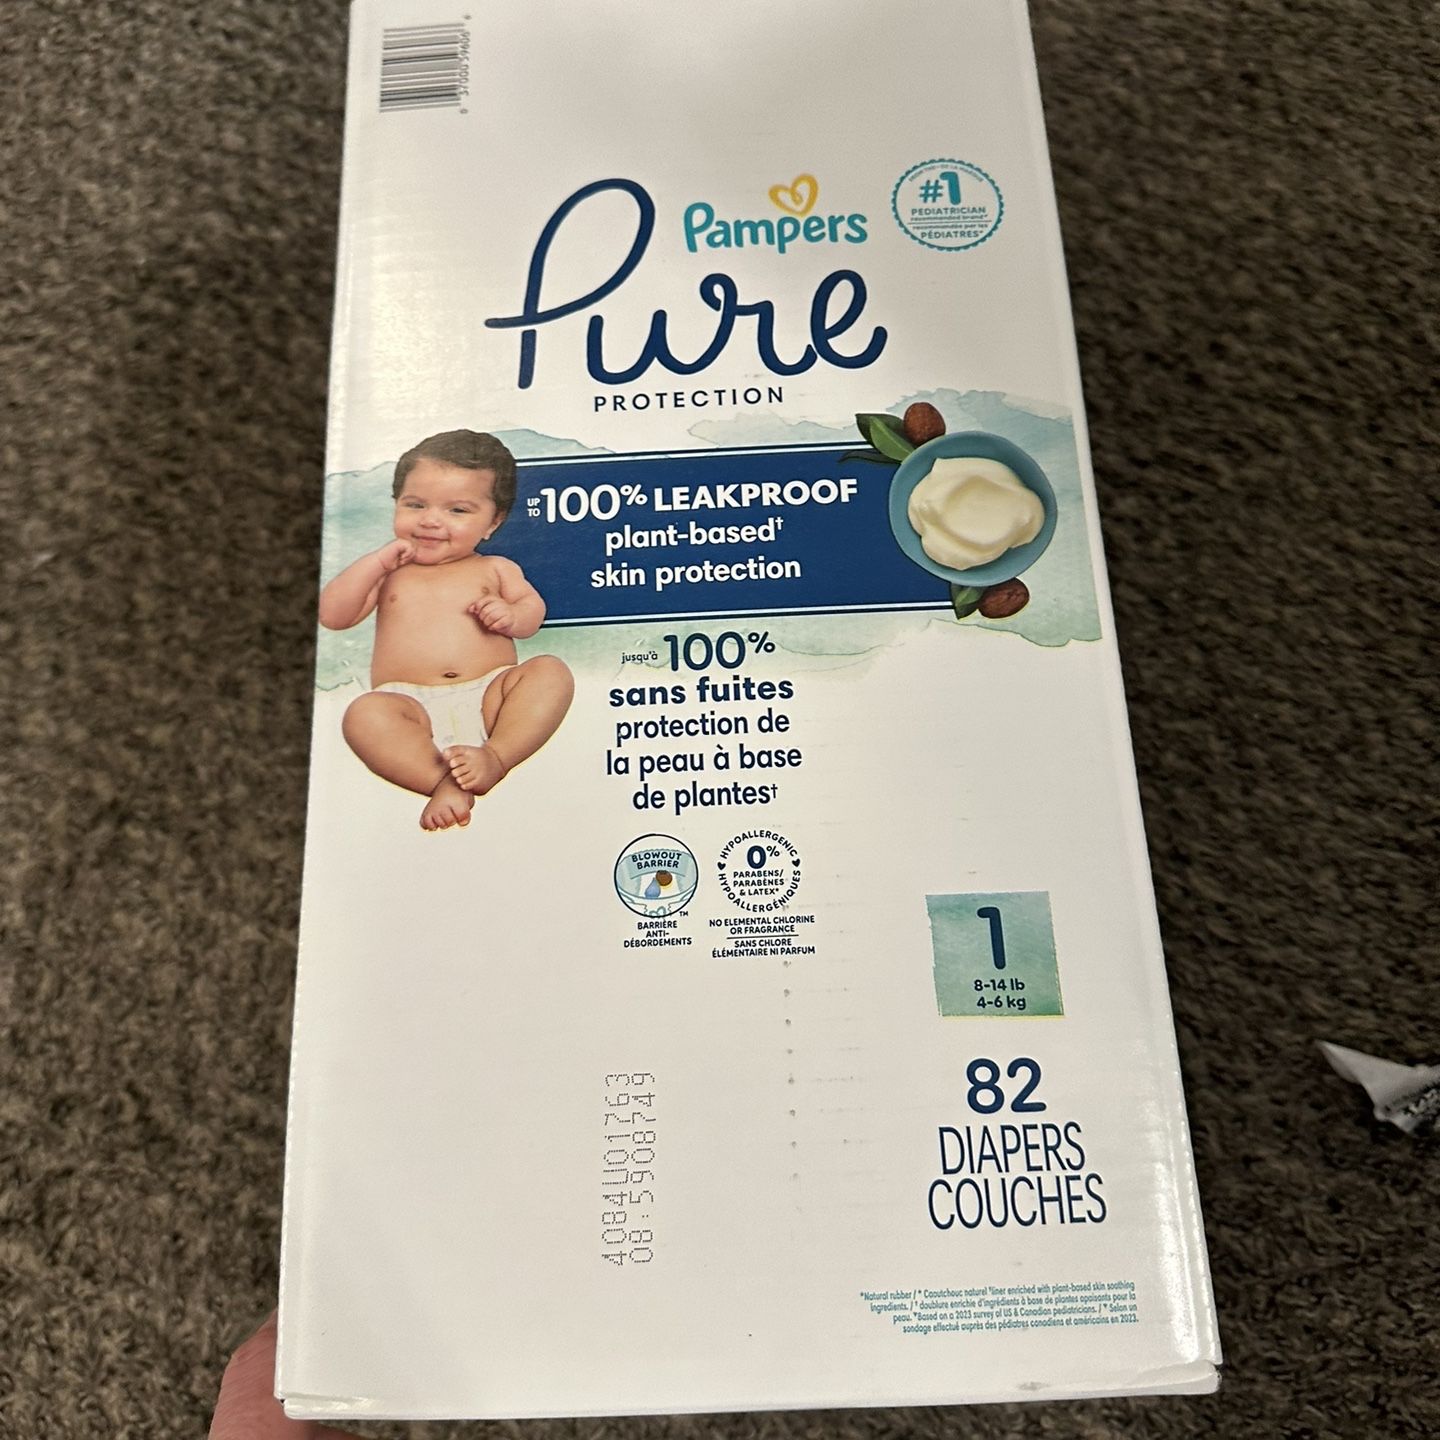 Pampers Pure Protrectuon